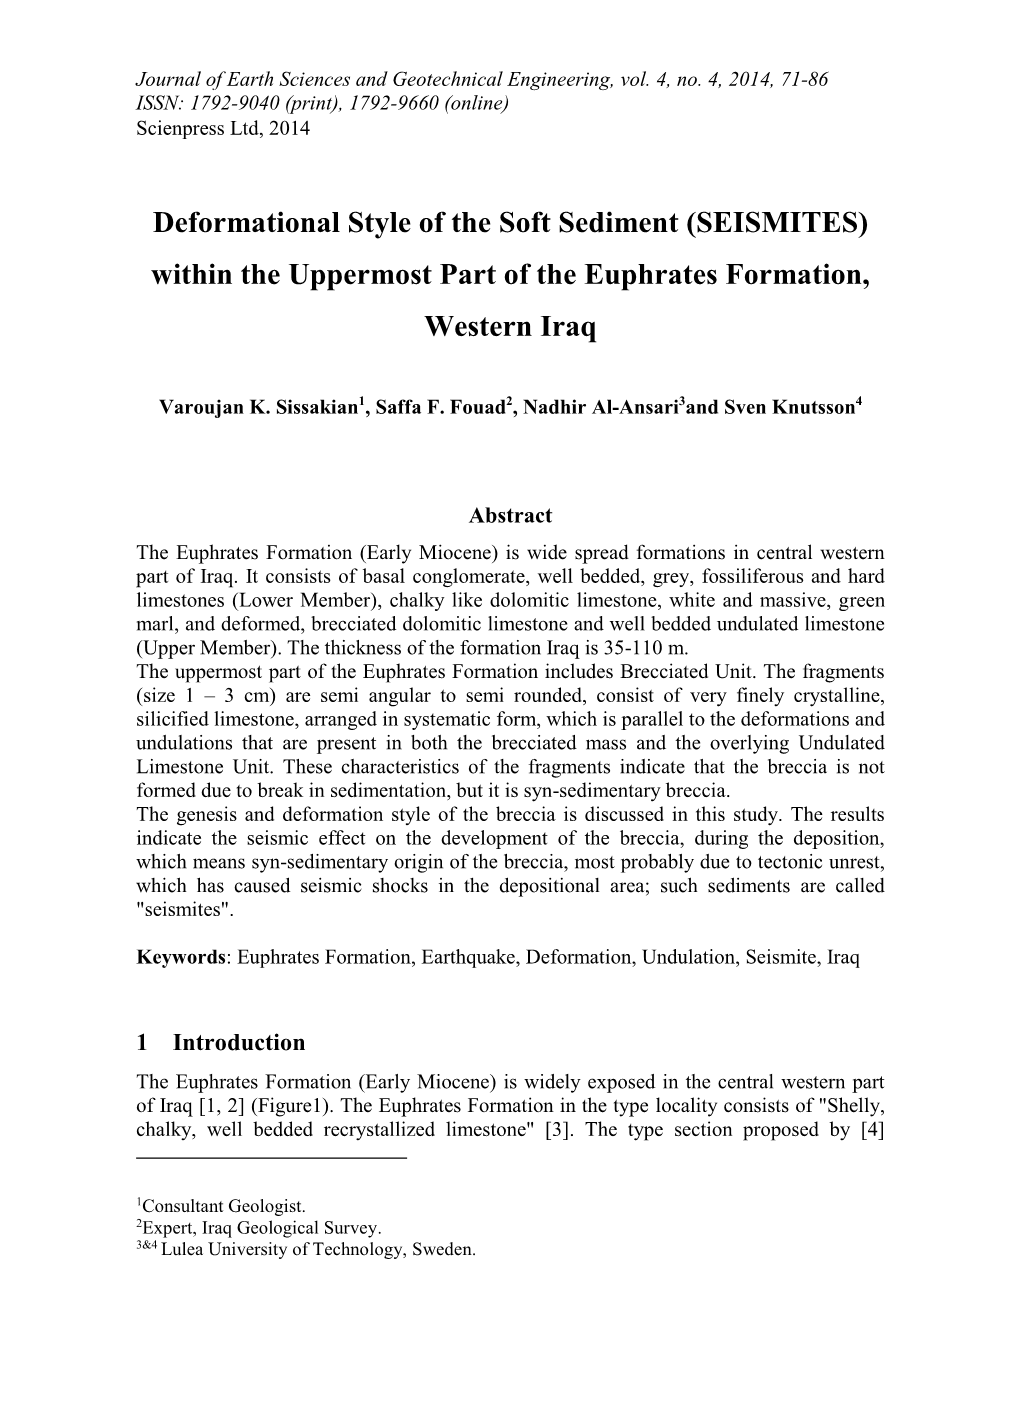 Deformational Style of the Soft Sediment (SEISMITES) Within the Uppermost Part of the Euphrates Formation, Western Iraq